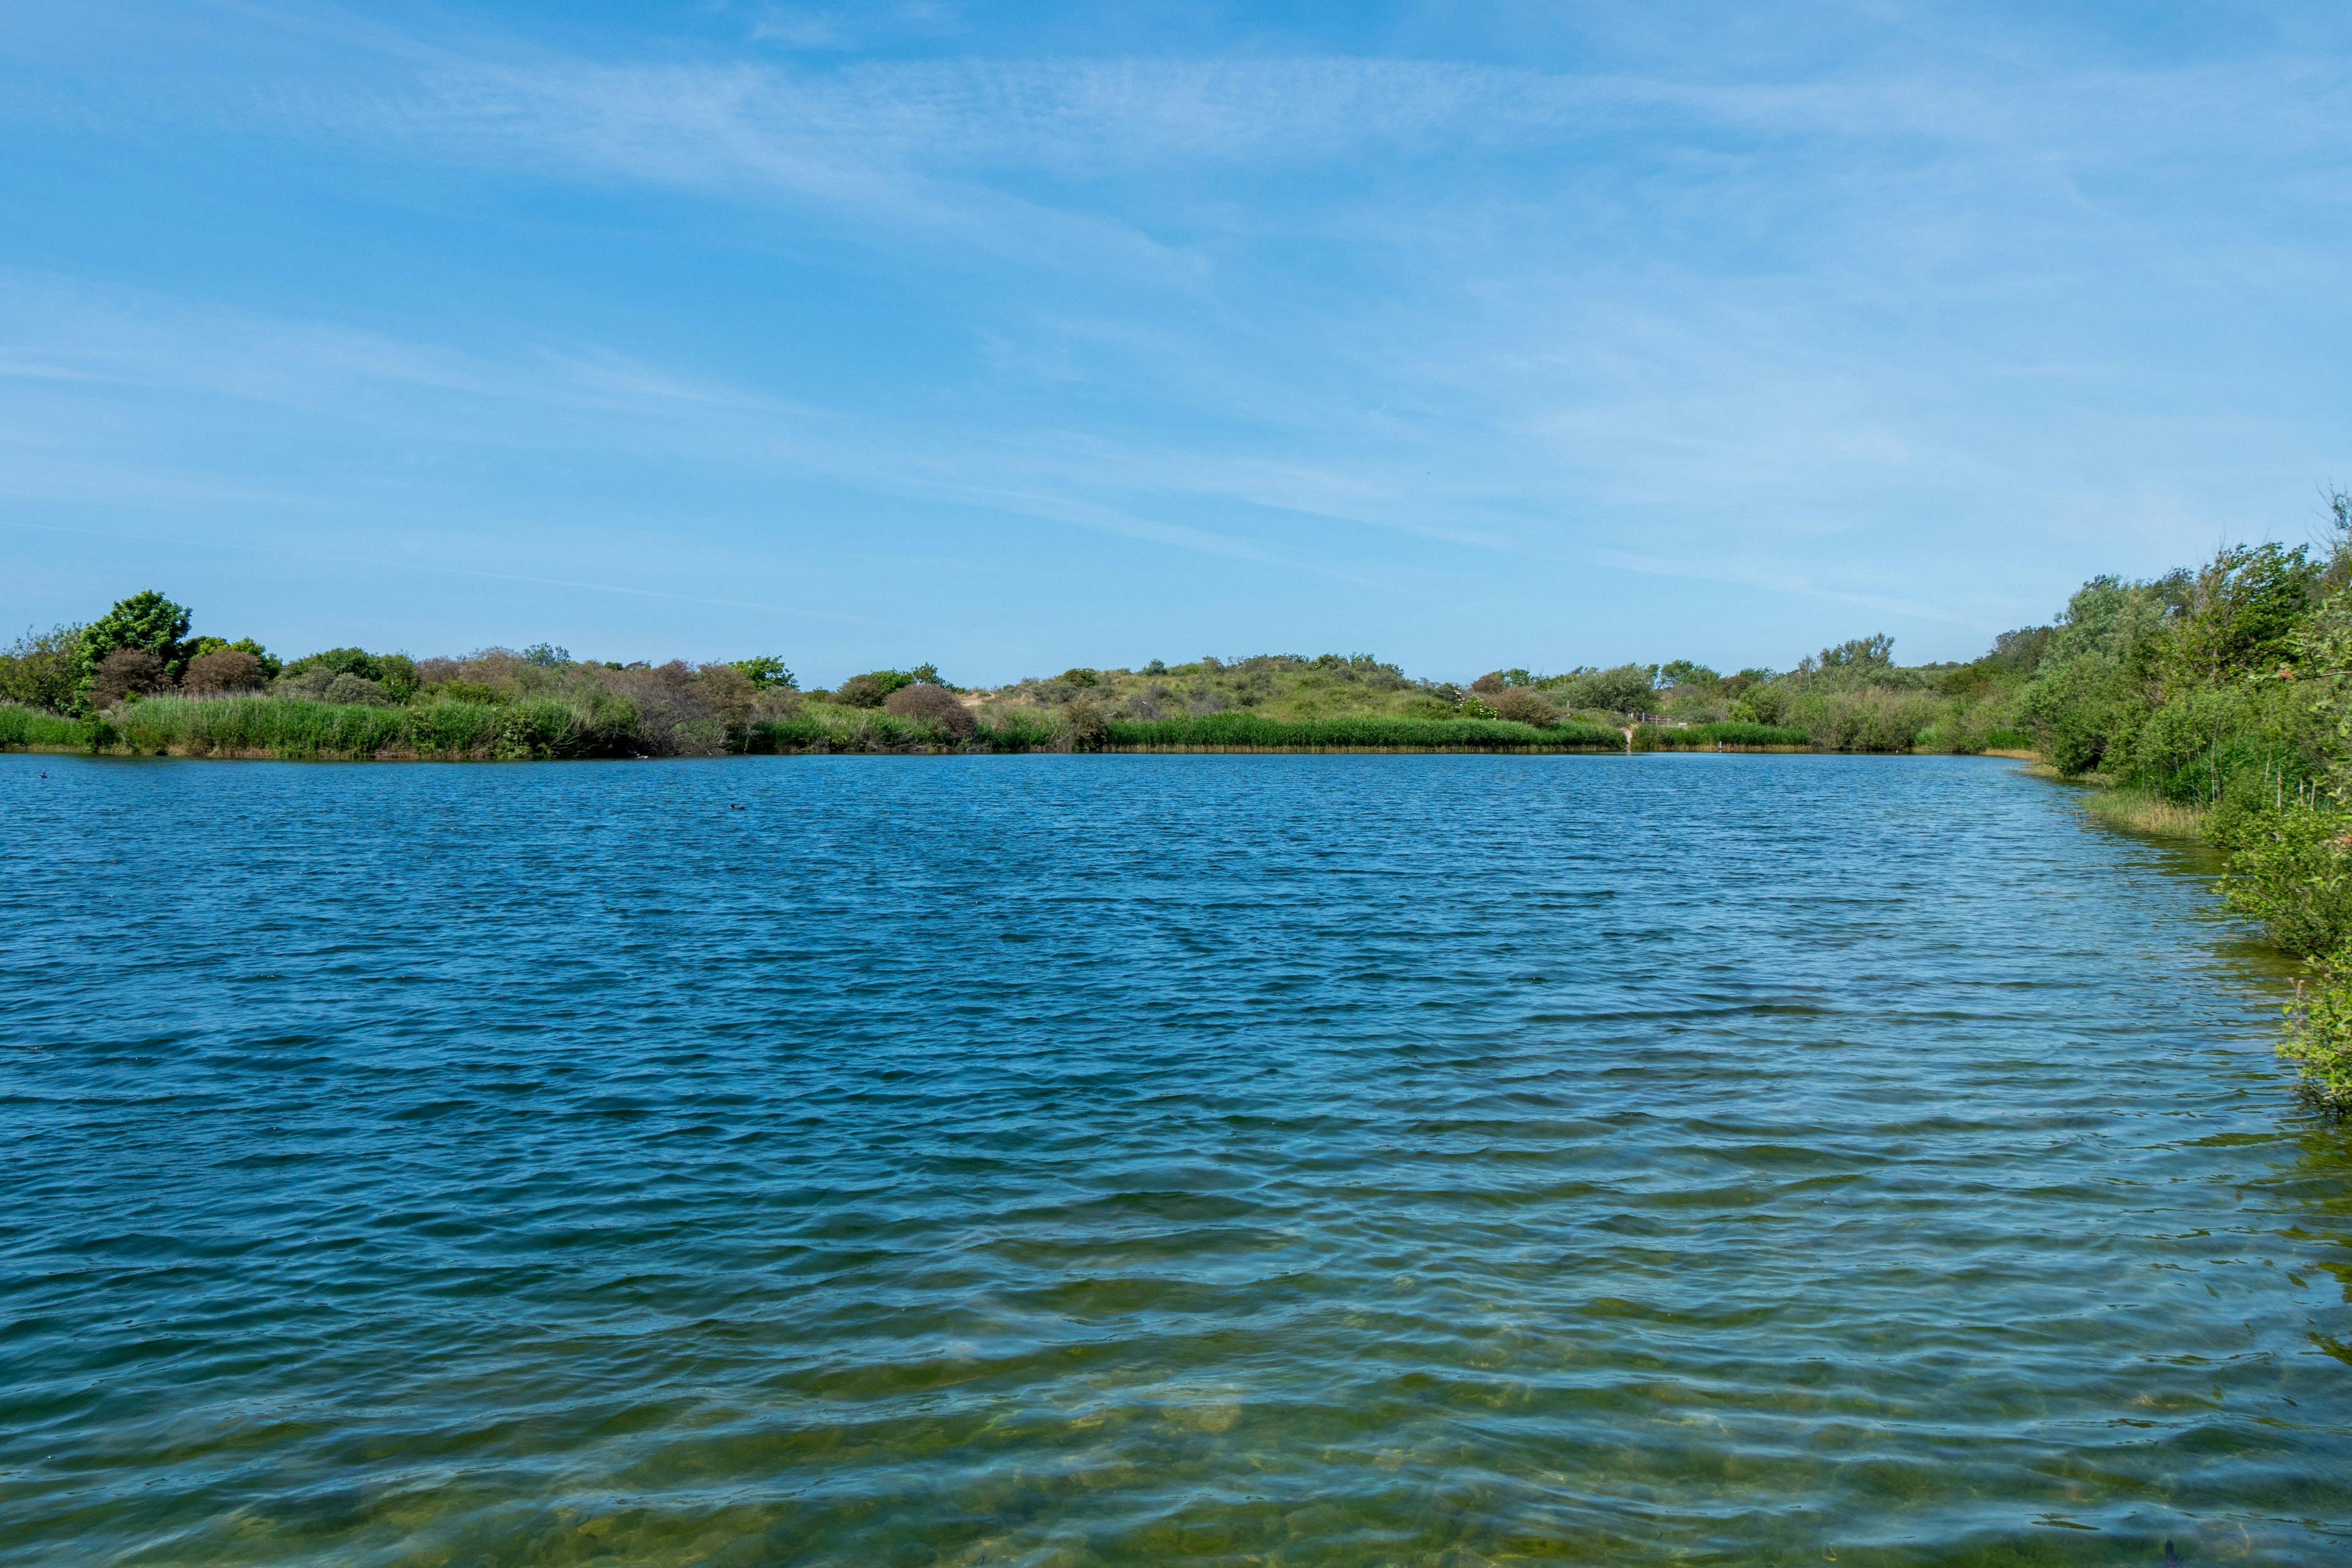 Water reservoir with dunes in the background | Image Credit: © Ferdi - stock.adobe.com.